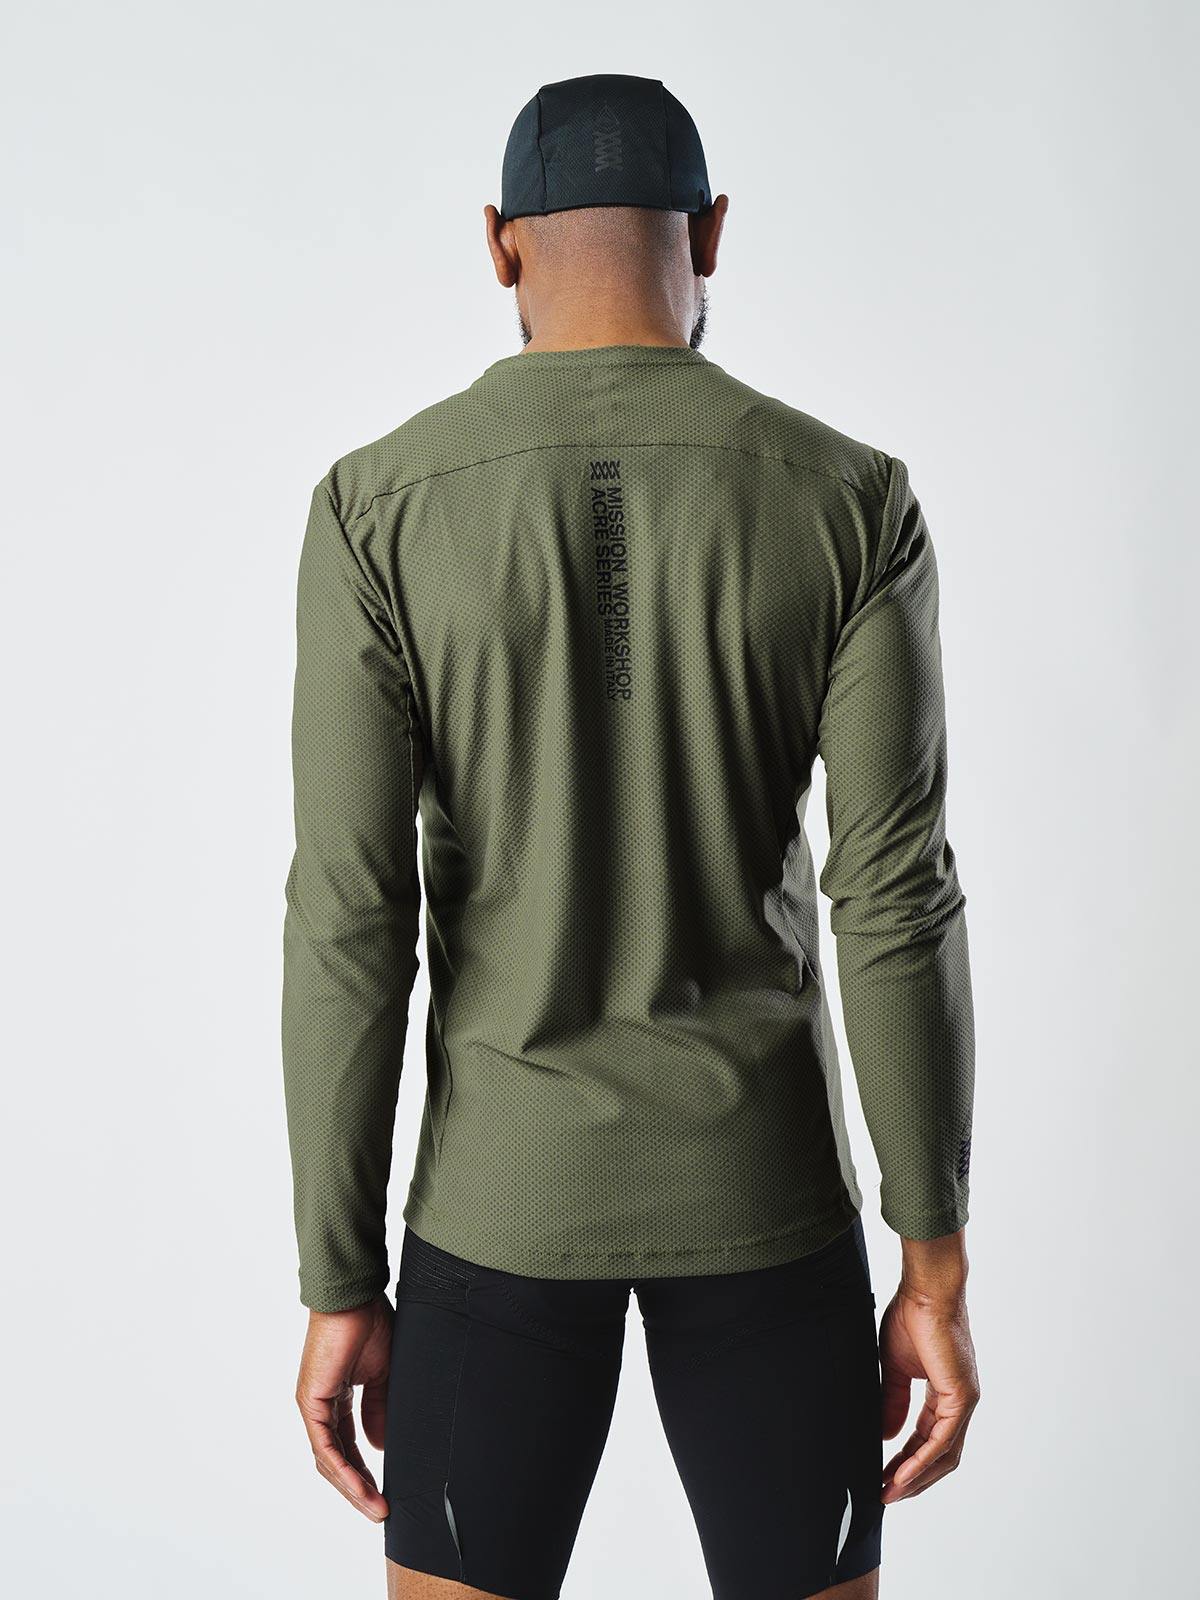 Mission Pro Tech Tee : LS Men's by Mission Workshop - Weatherproof Bags & Technical Apparel - San Francisco & Los Angeles - Built to endure - Guaranteed forever